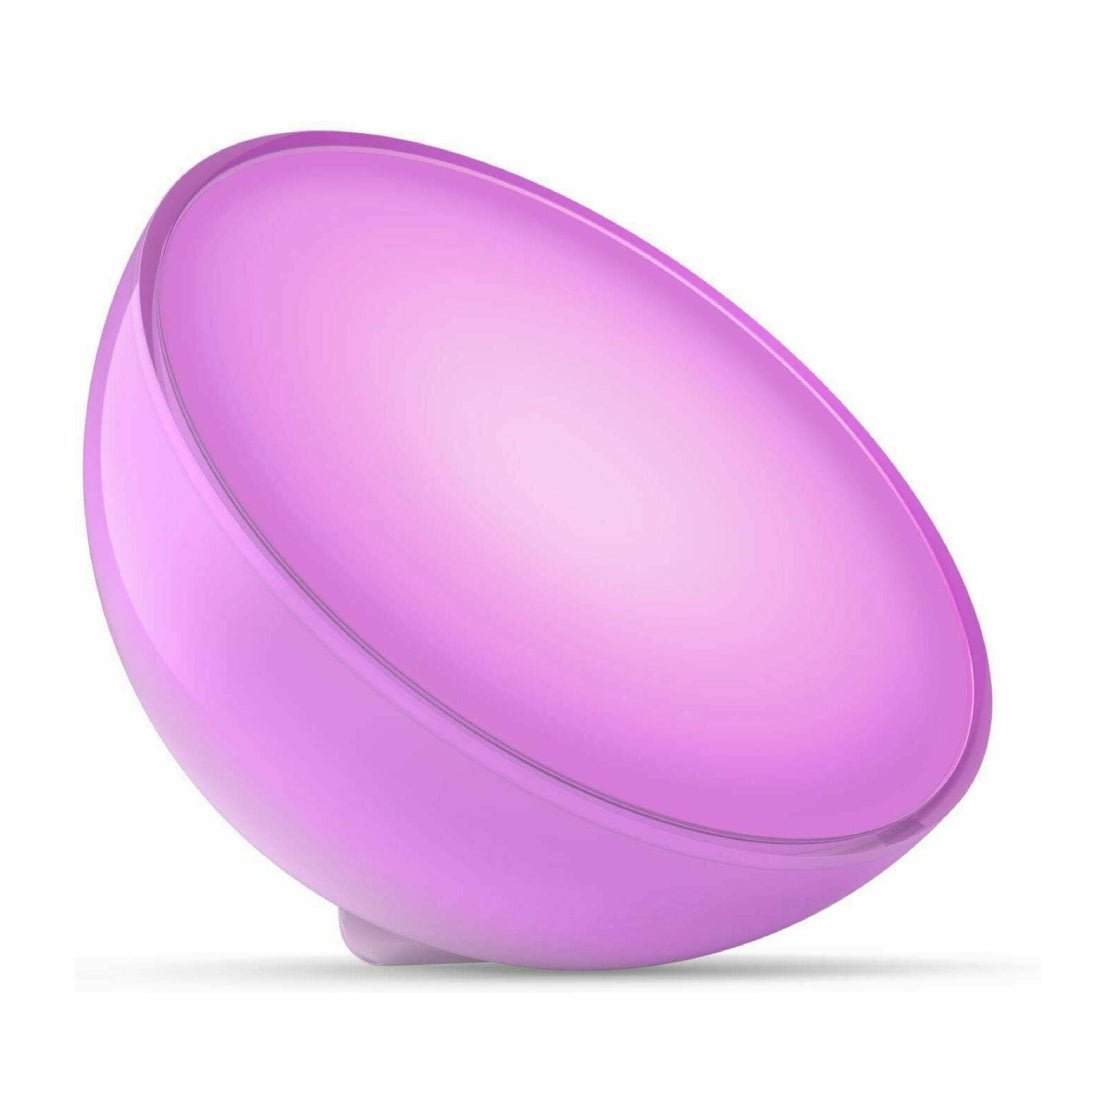 Philips Hue Go Ambiance Smart Portable Light - White & Color - ضوء - Store 974 | ستور ٩٧٤